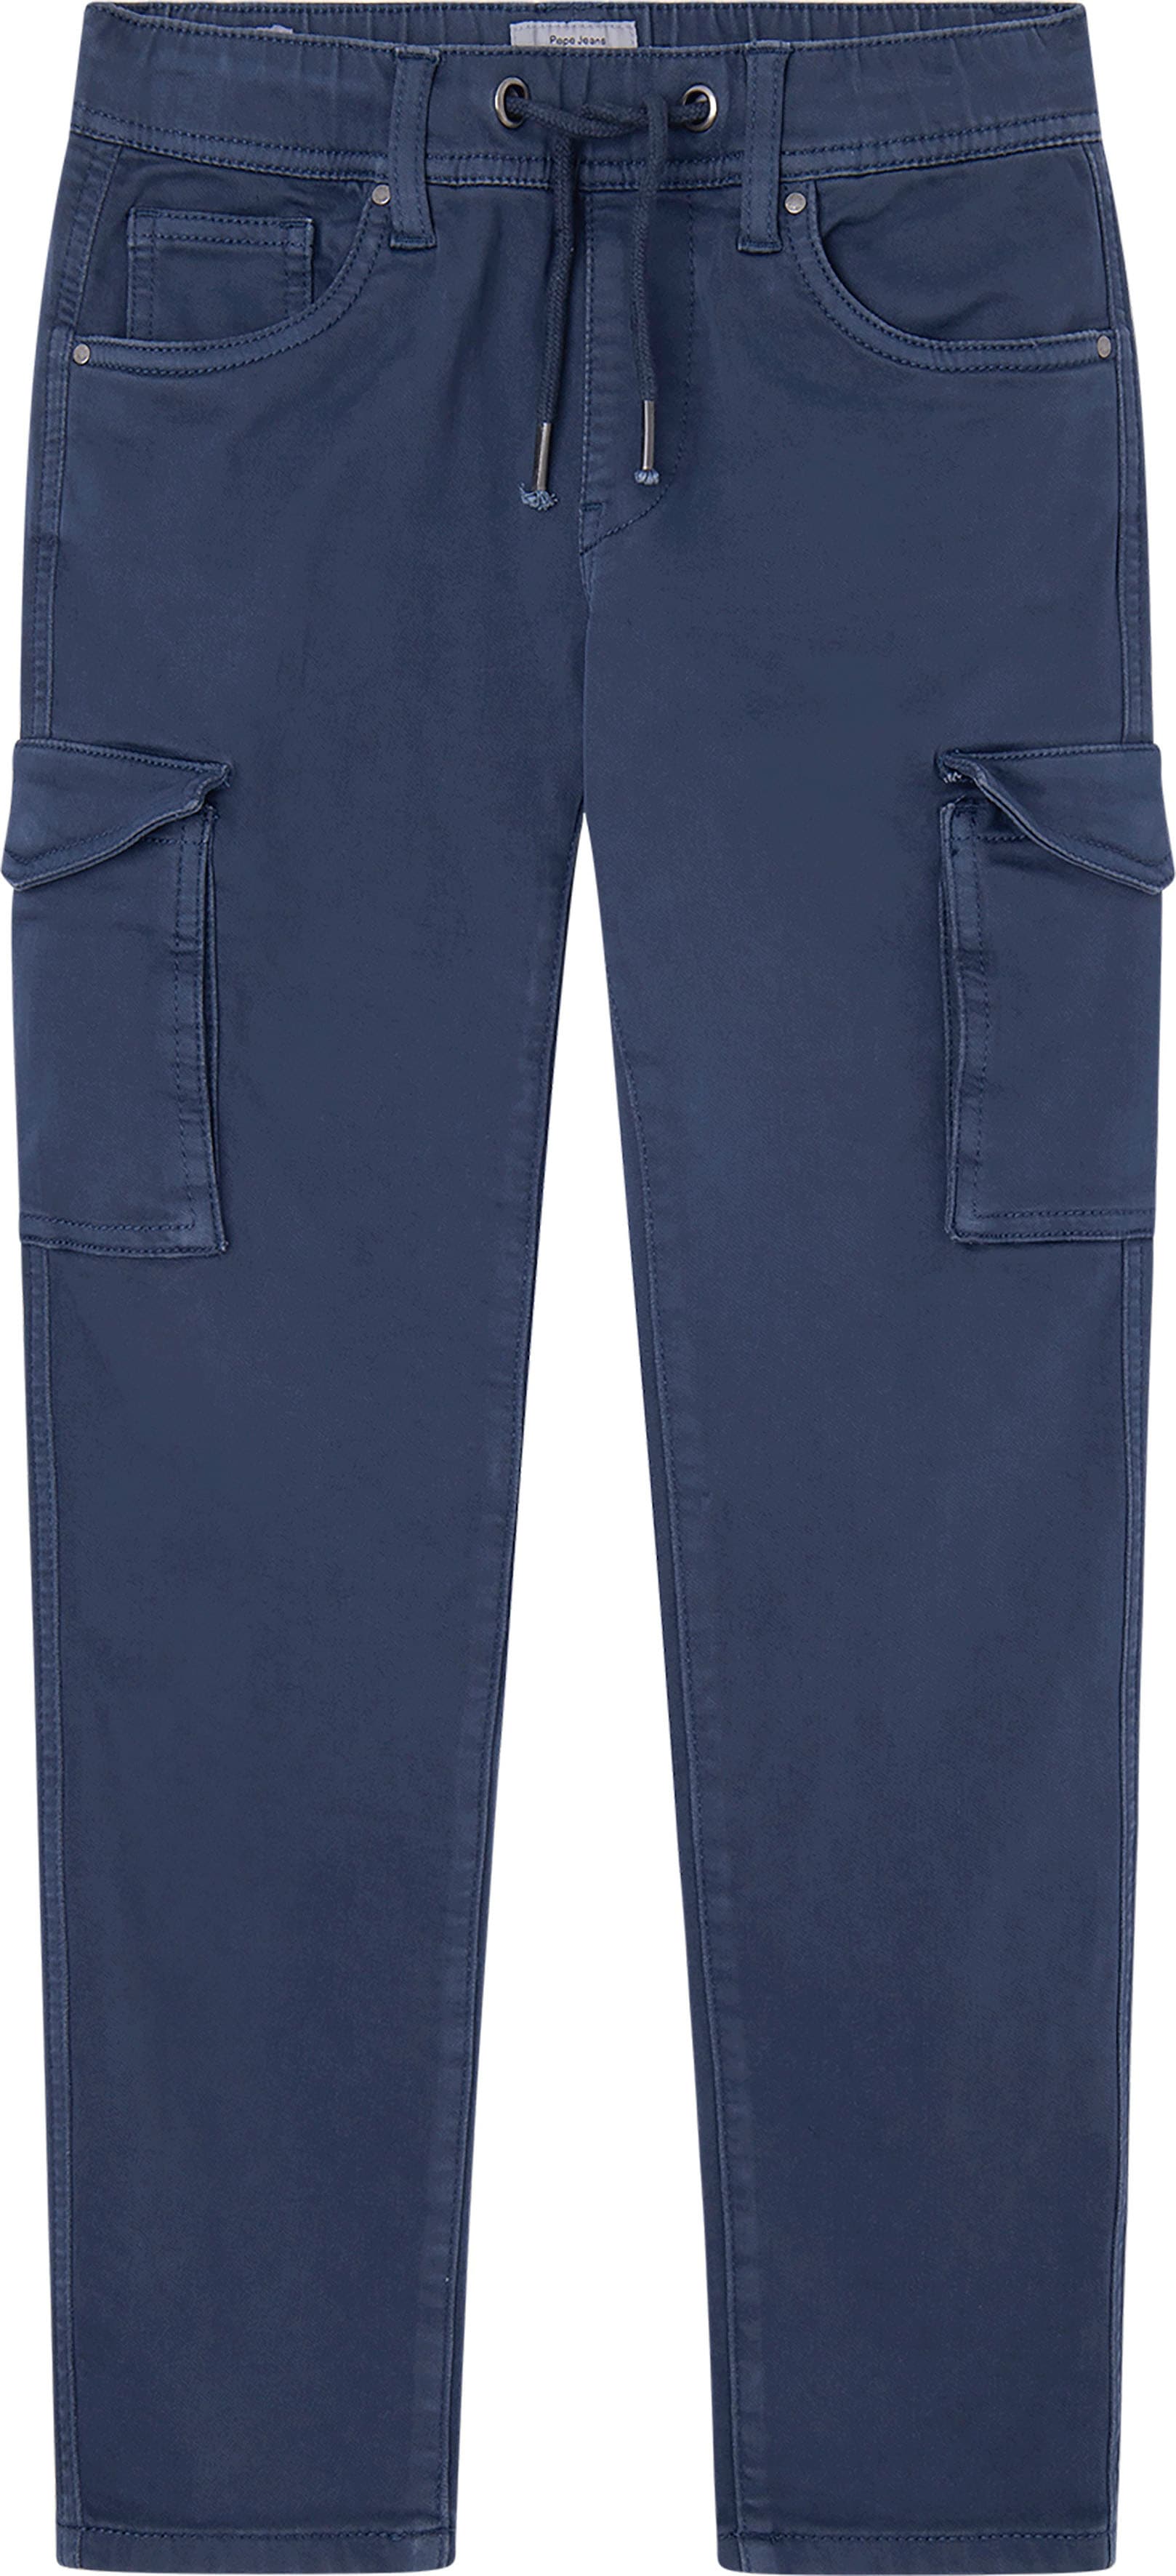 Pepe Jeans Cargohose »Chase« von Pepe Jeans